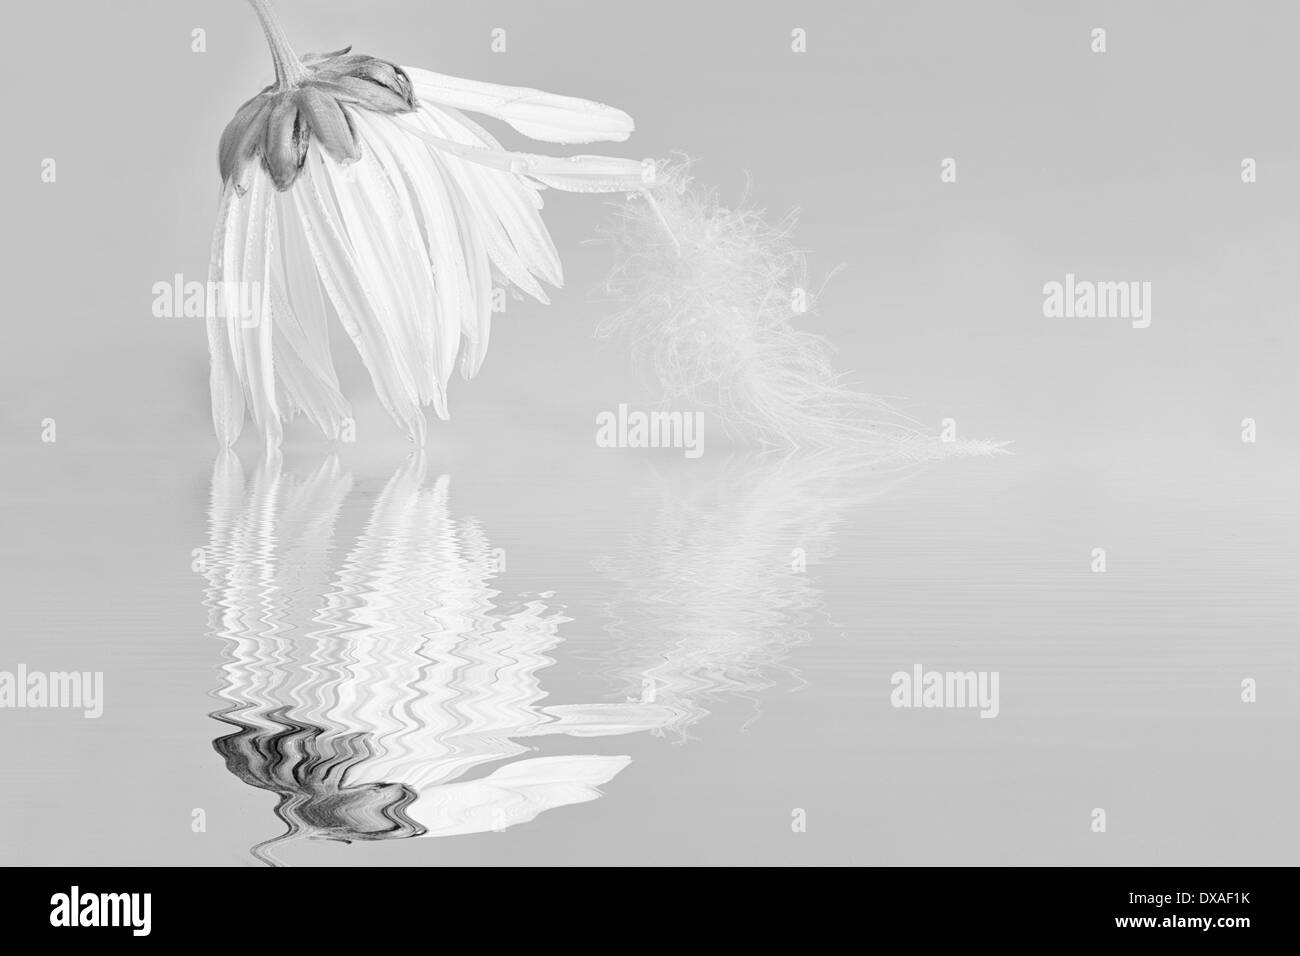 Ox-eye daisy Leucanthemum vulgare black & white with a feather on a petal flower hanging down touching the surface of the water Stock Photo